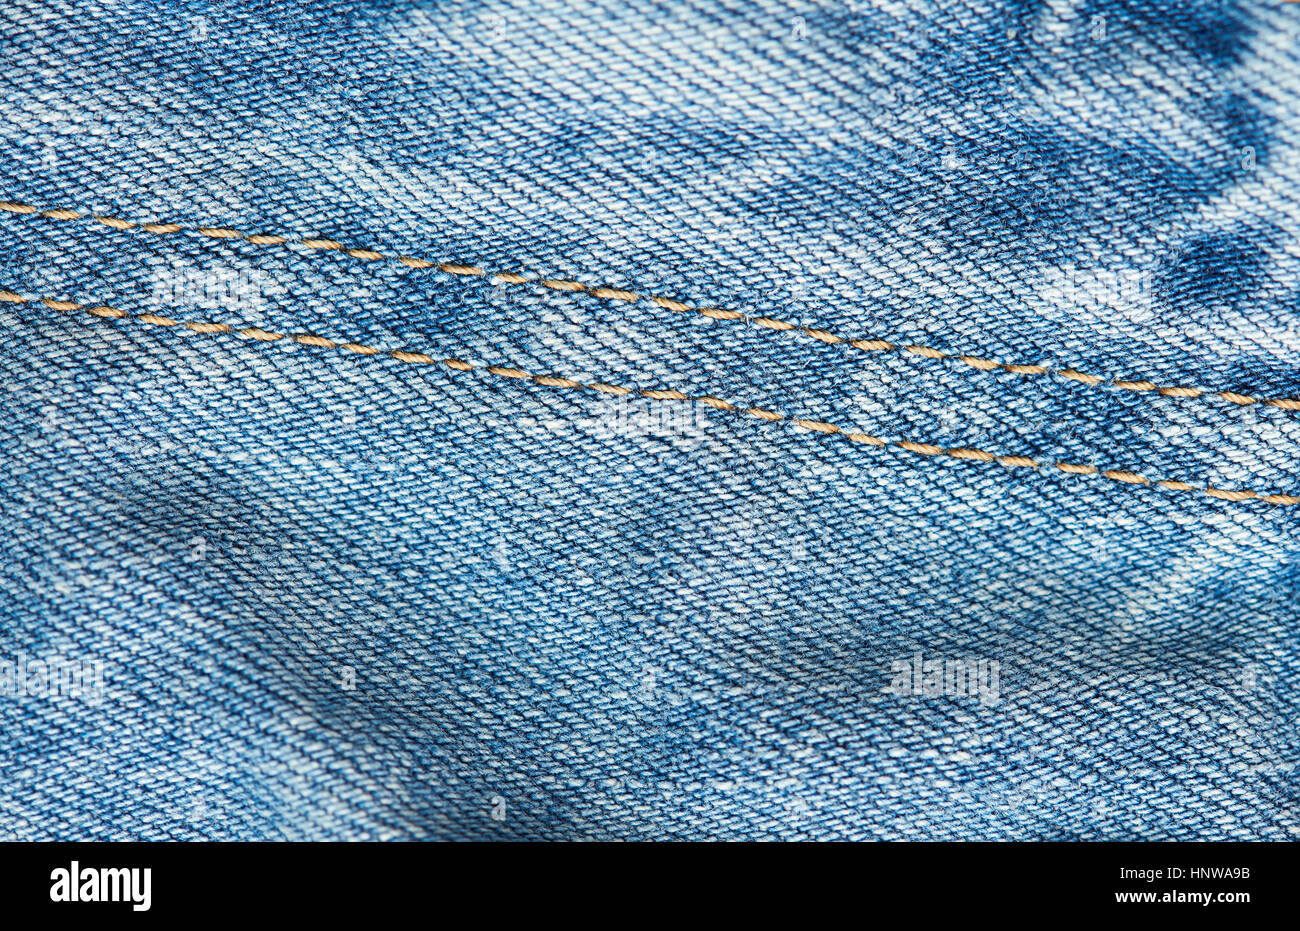 Close up of light blue jeans stitches textile fabric background Stock Photo